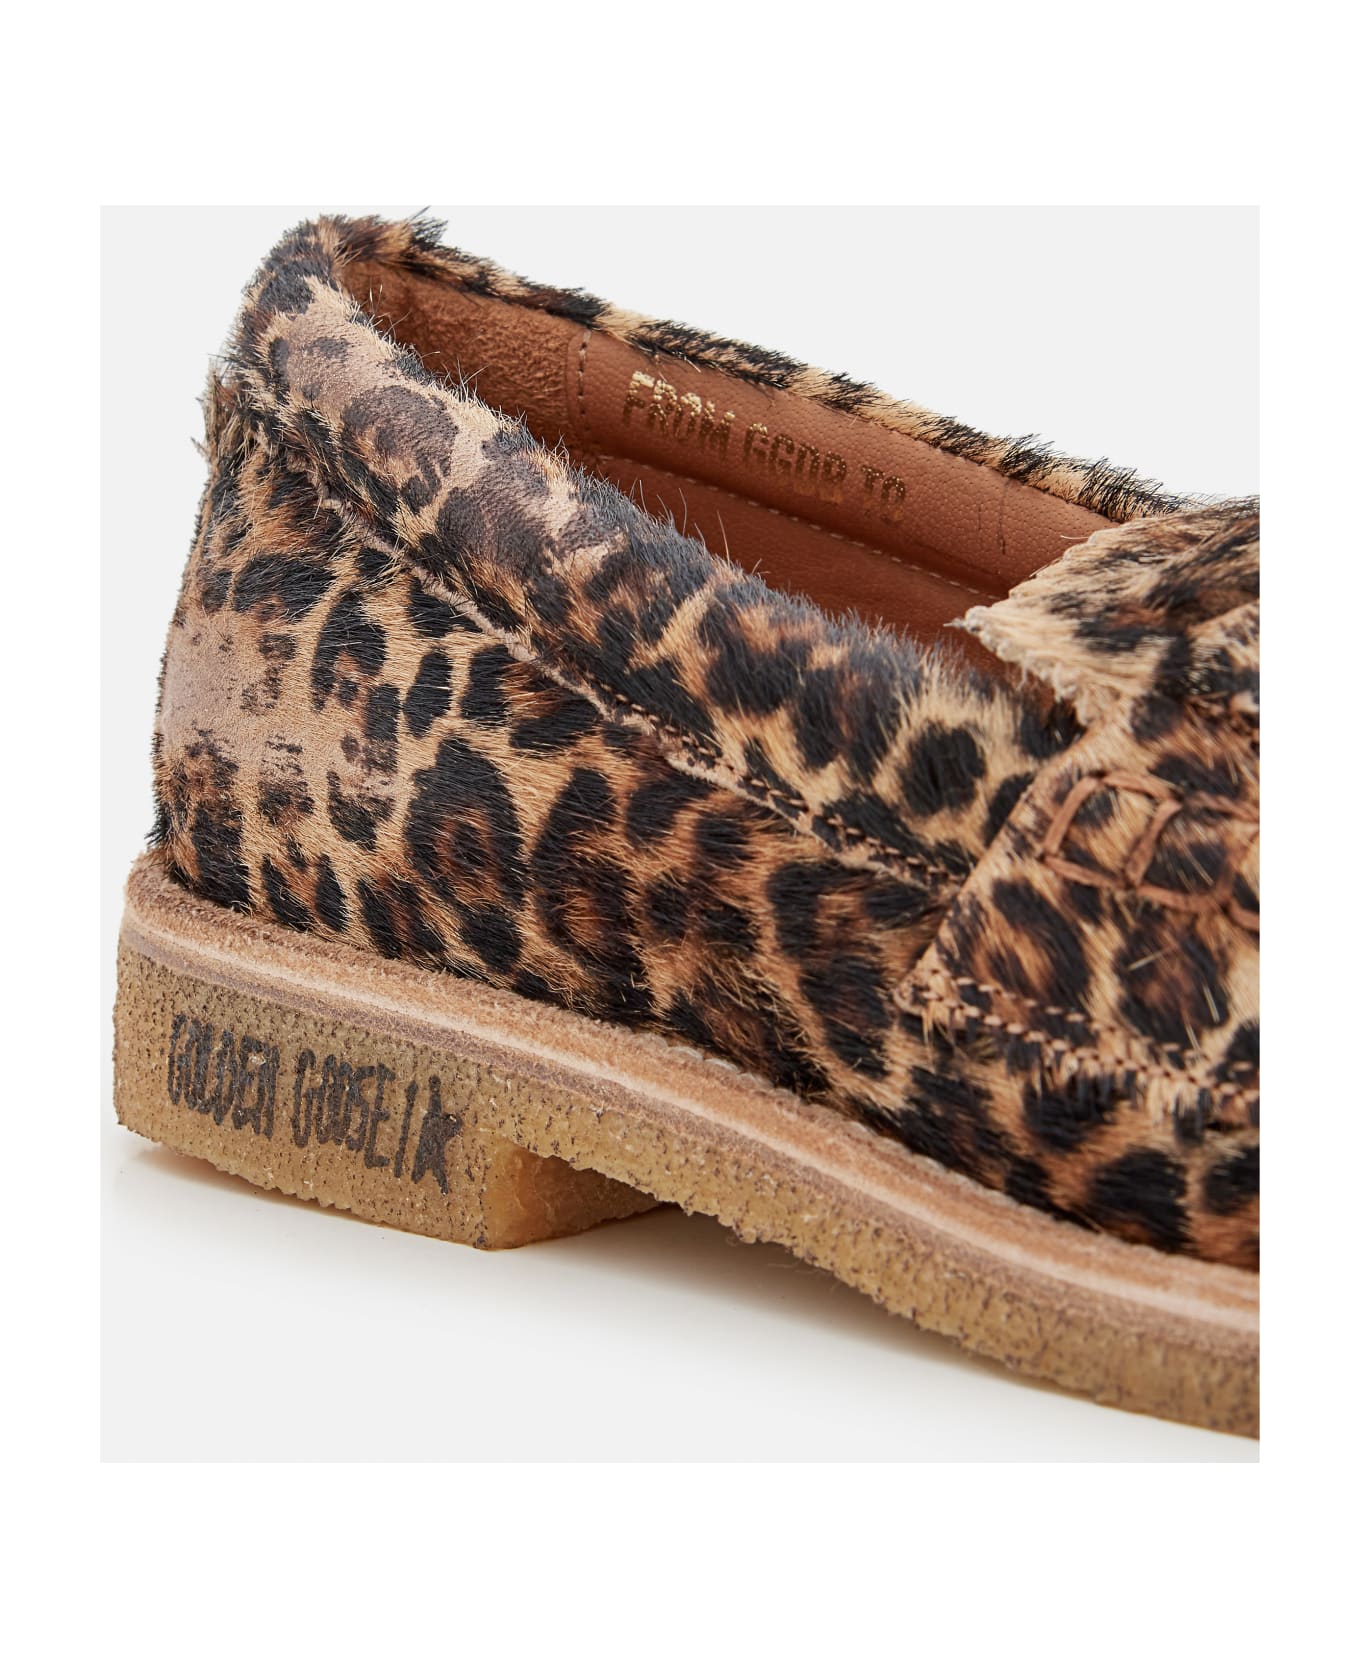 Golden Goose Jerry Leopard Print Horsy Leather Loafers - Brown